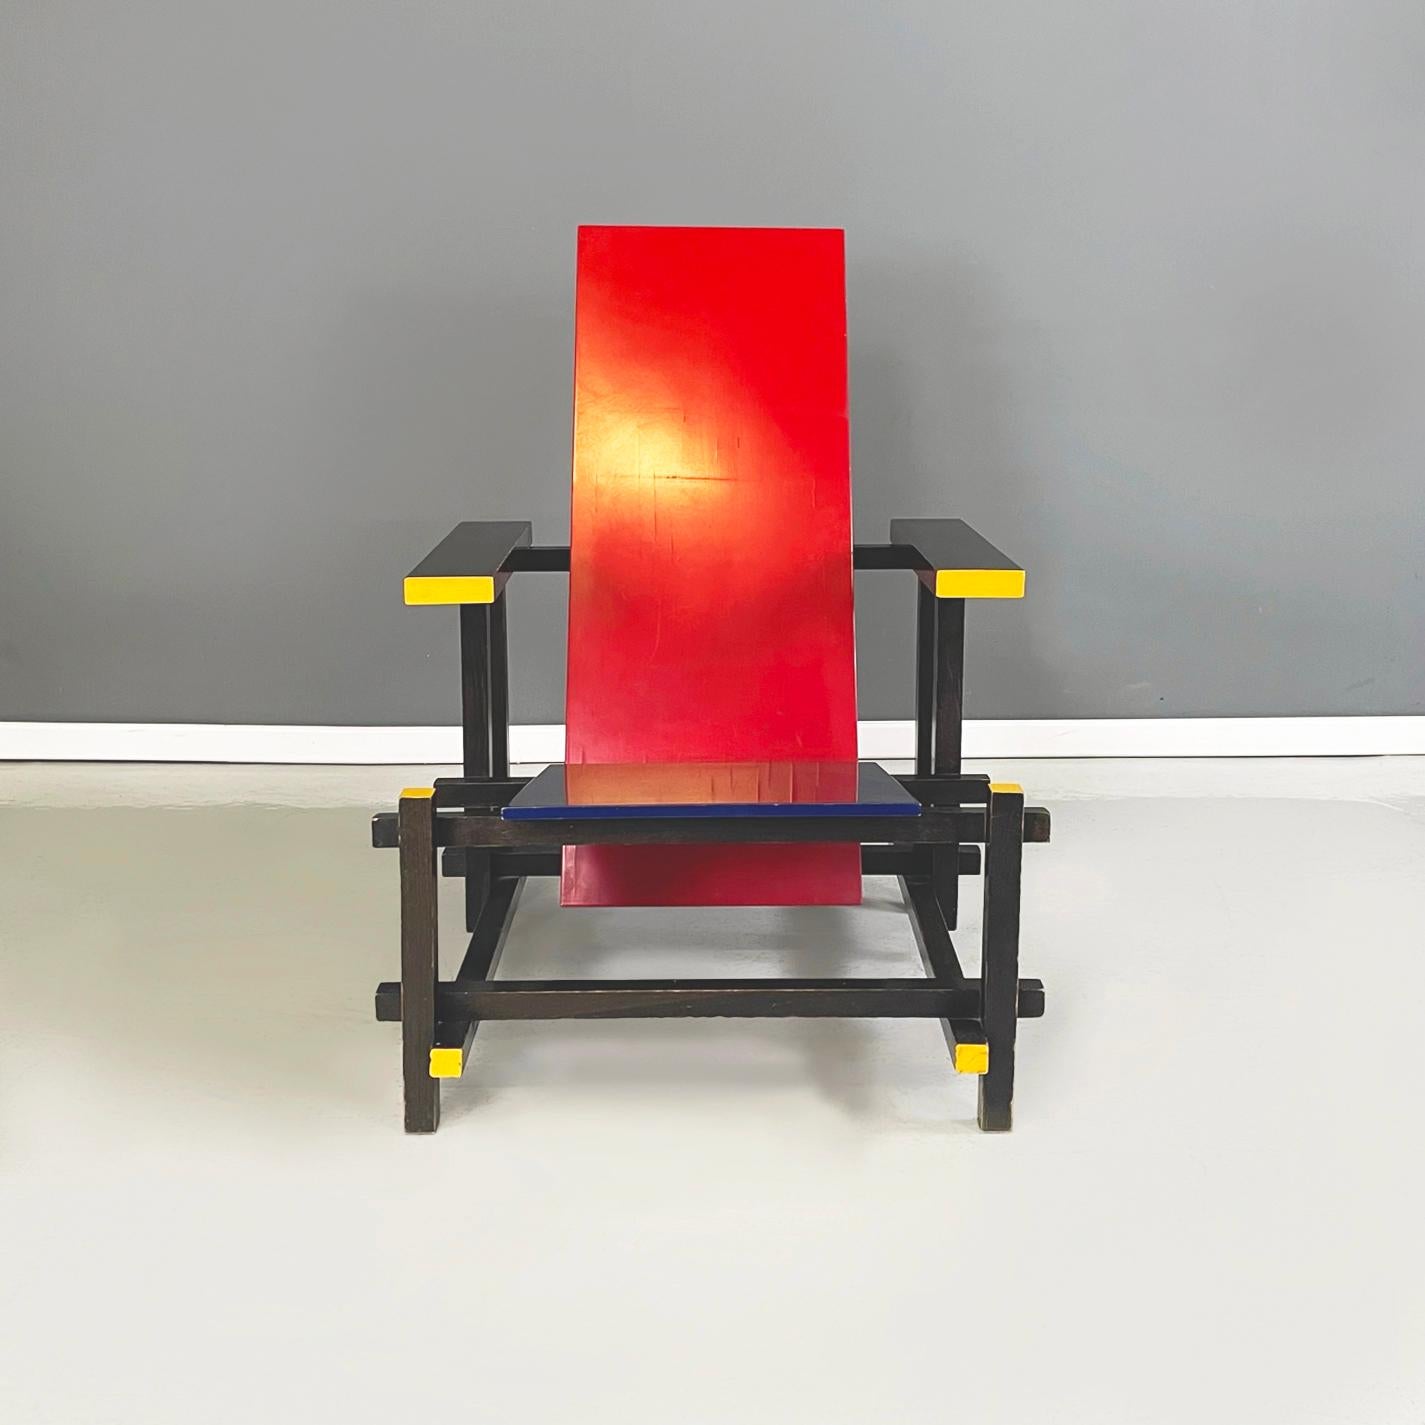 Italian Bauhaus Armchair Red and Blue by Gerrit Thomas Rietveld for Cassina 1971
Armchair mod. Red and Blue entirely in wood painted in yellow, red, blue and black. The chair has an inclined seat in blue wood and an inclined backrest in red wood.